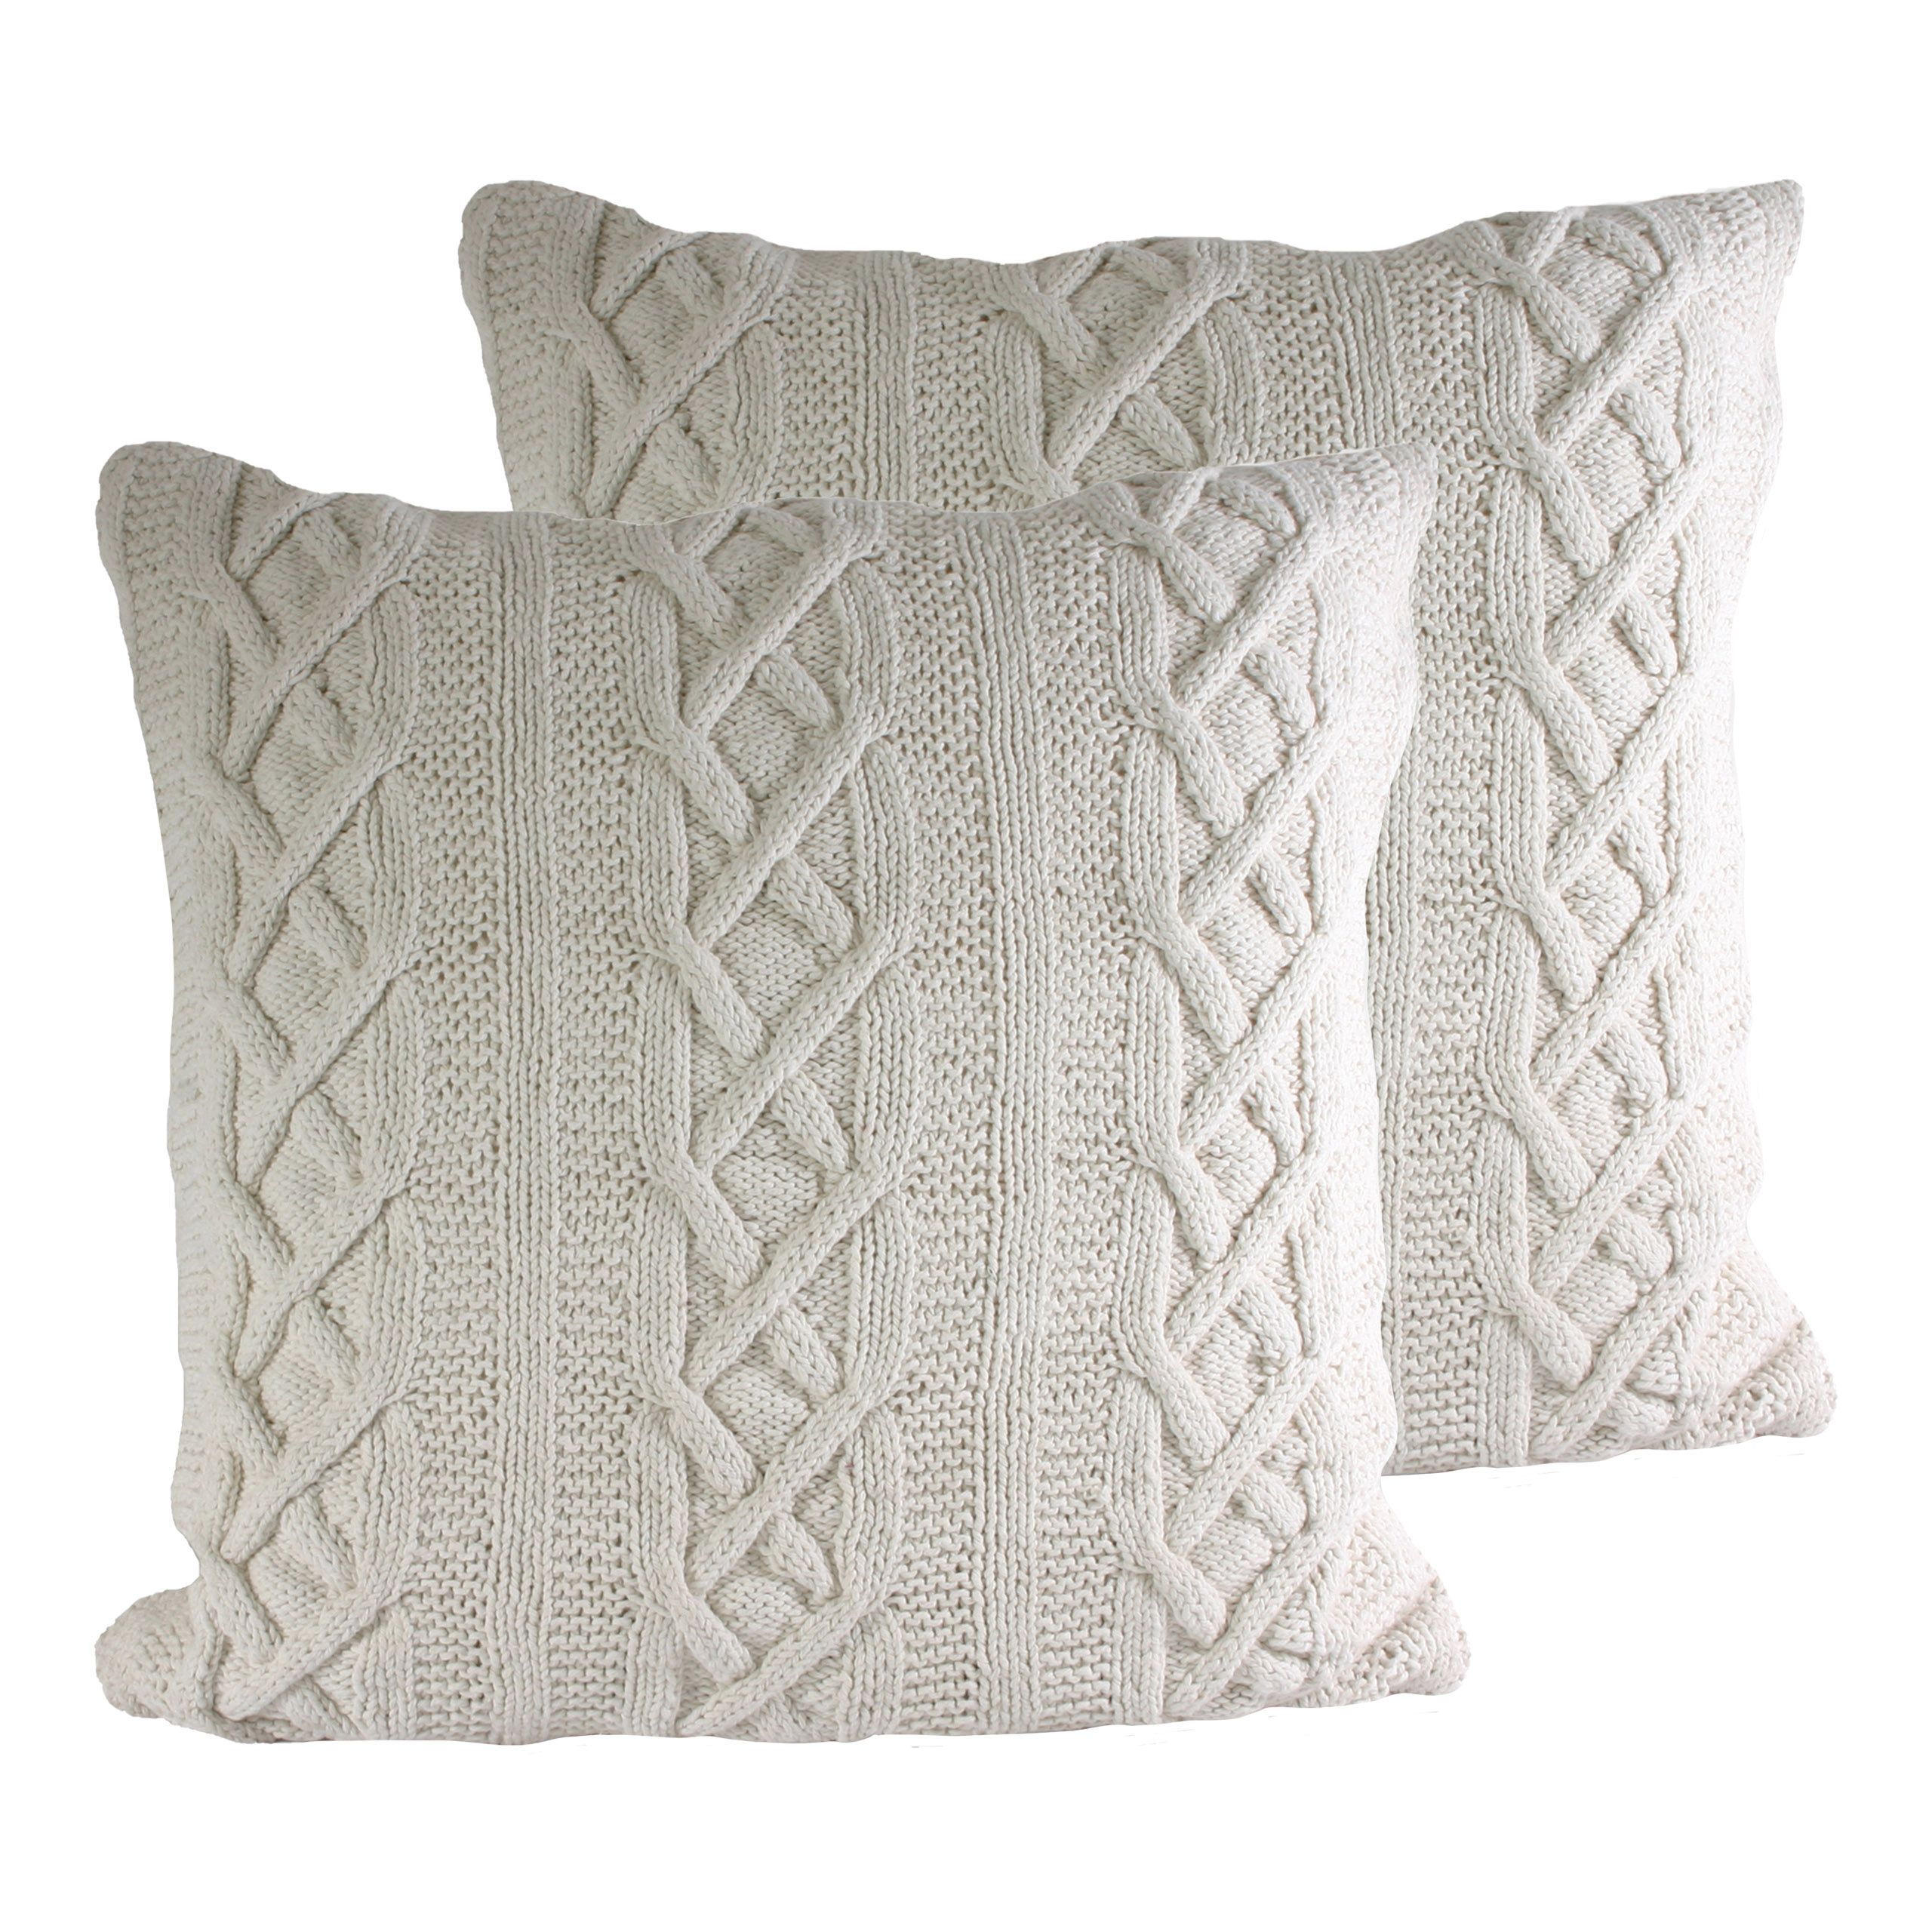 The Aran cushion is a modern interpretation of a classic look. This gorgeous cushion features a chunky, cable knit design that adds unique textures to your home interior, bringing a traditional twist into a modern setting or matching a cottage-style theme. With a hidden zip design this cushion will not catch and has a plain grey reverse. Thanks to its 100% cotton weave this cushion cover is super soft to touch making it great for beds. It must be hand washed only and laid flat to dry. Made to match with the Aran cable knit throws in corresponding natural colours.